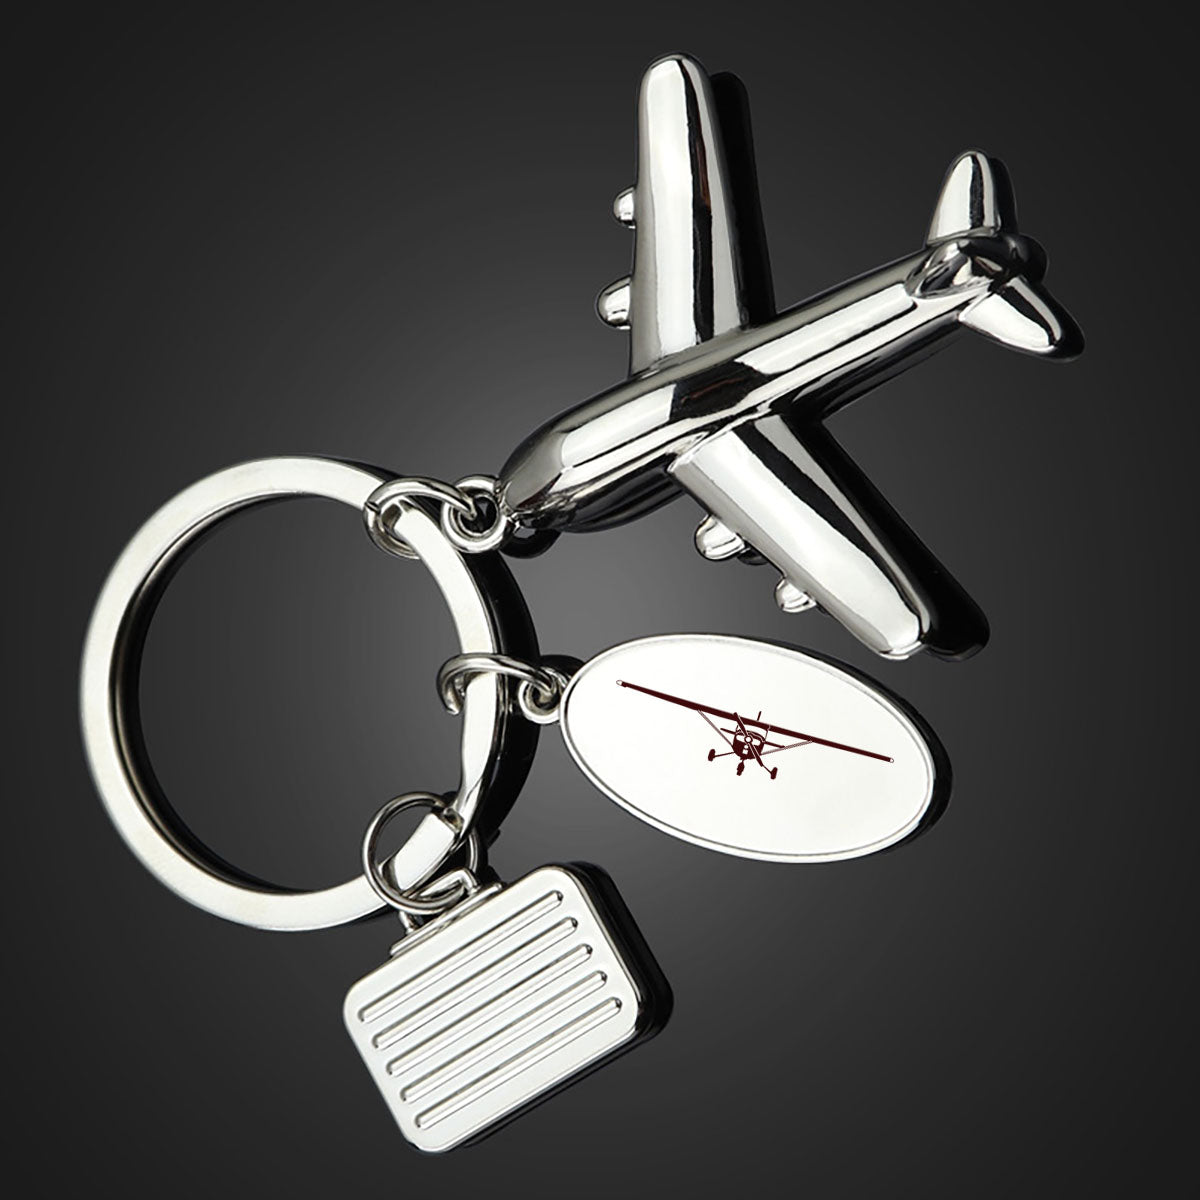 Cessna 172 Silhouette Designed Suitcase Airplane Key Chains